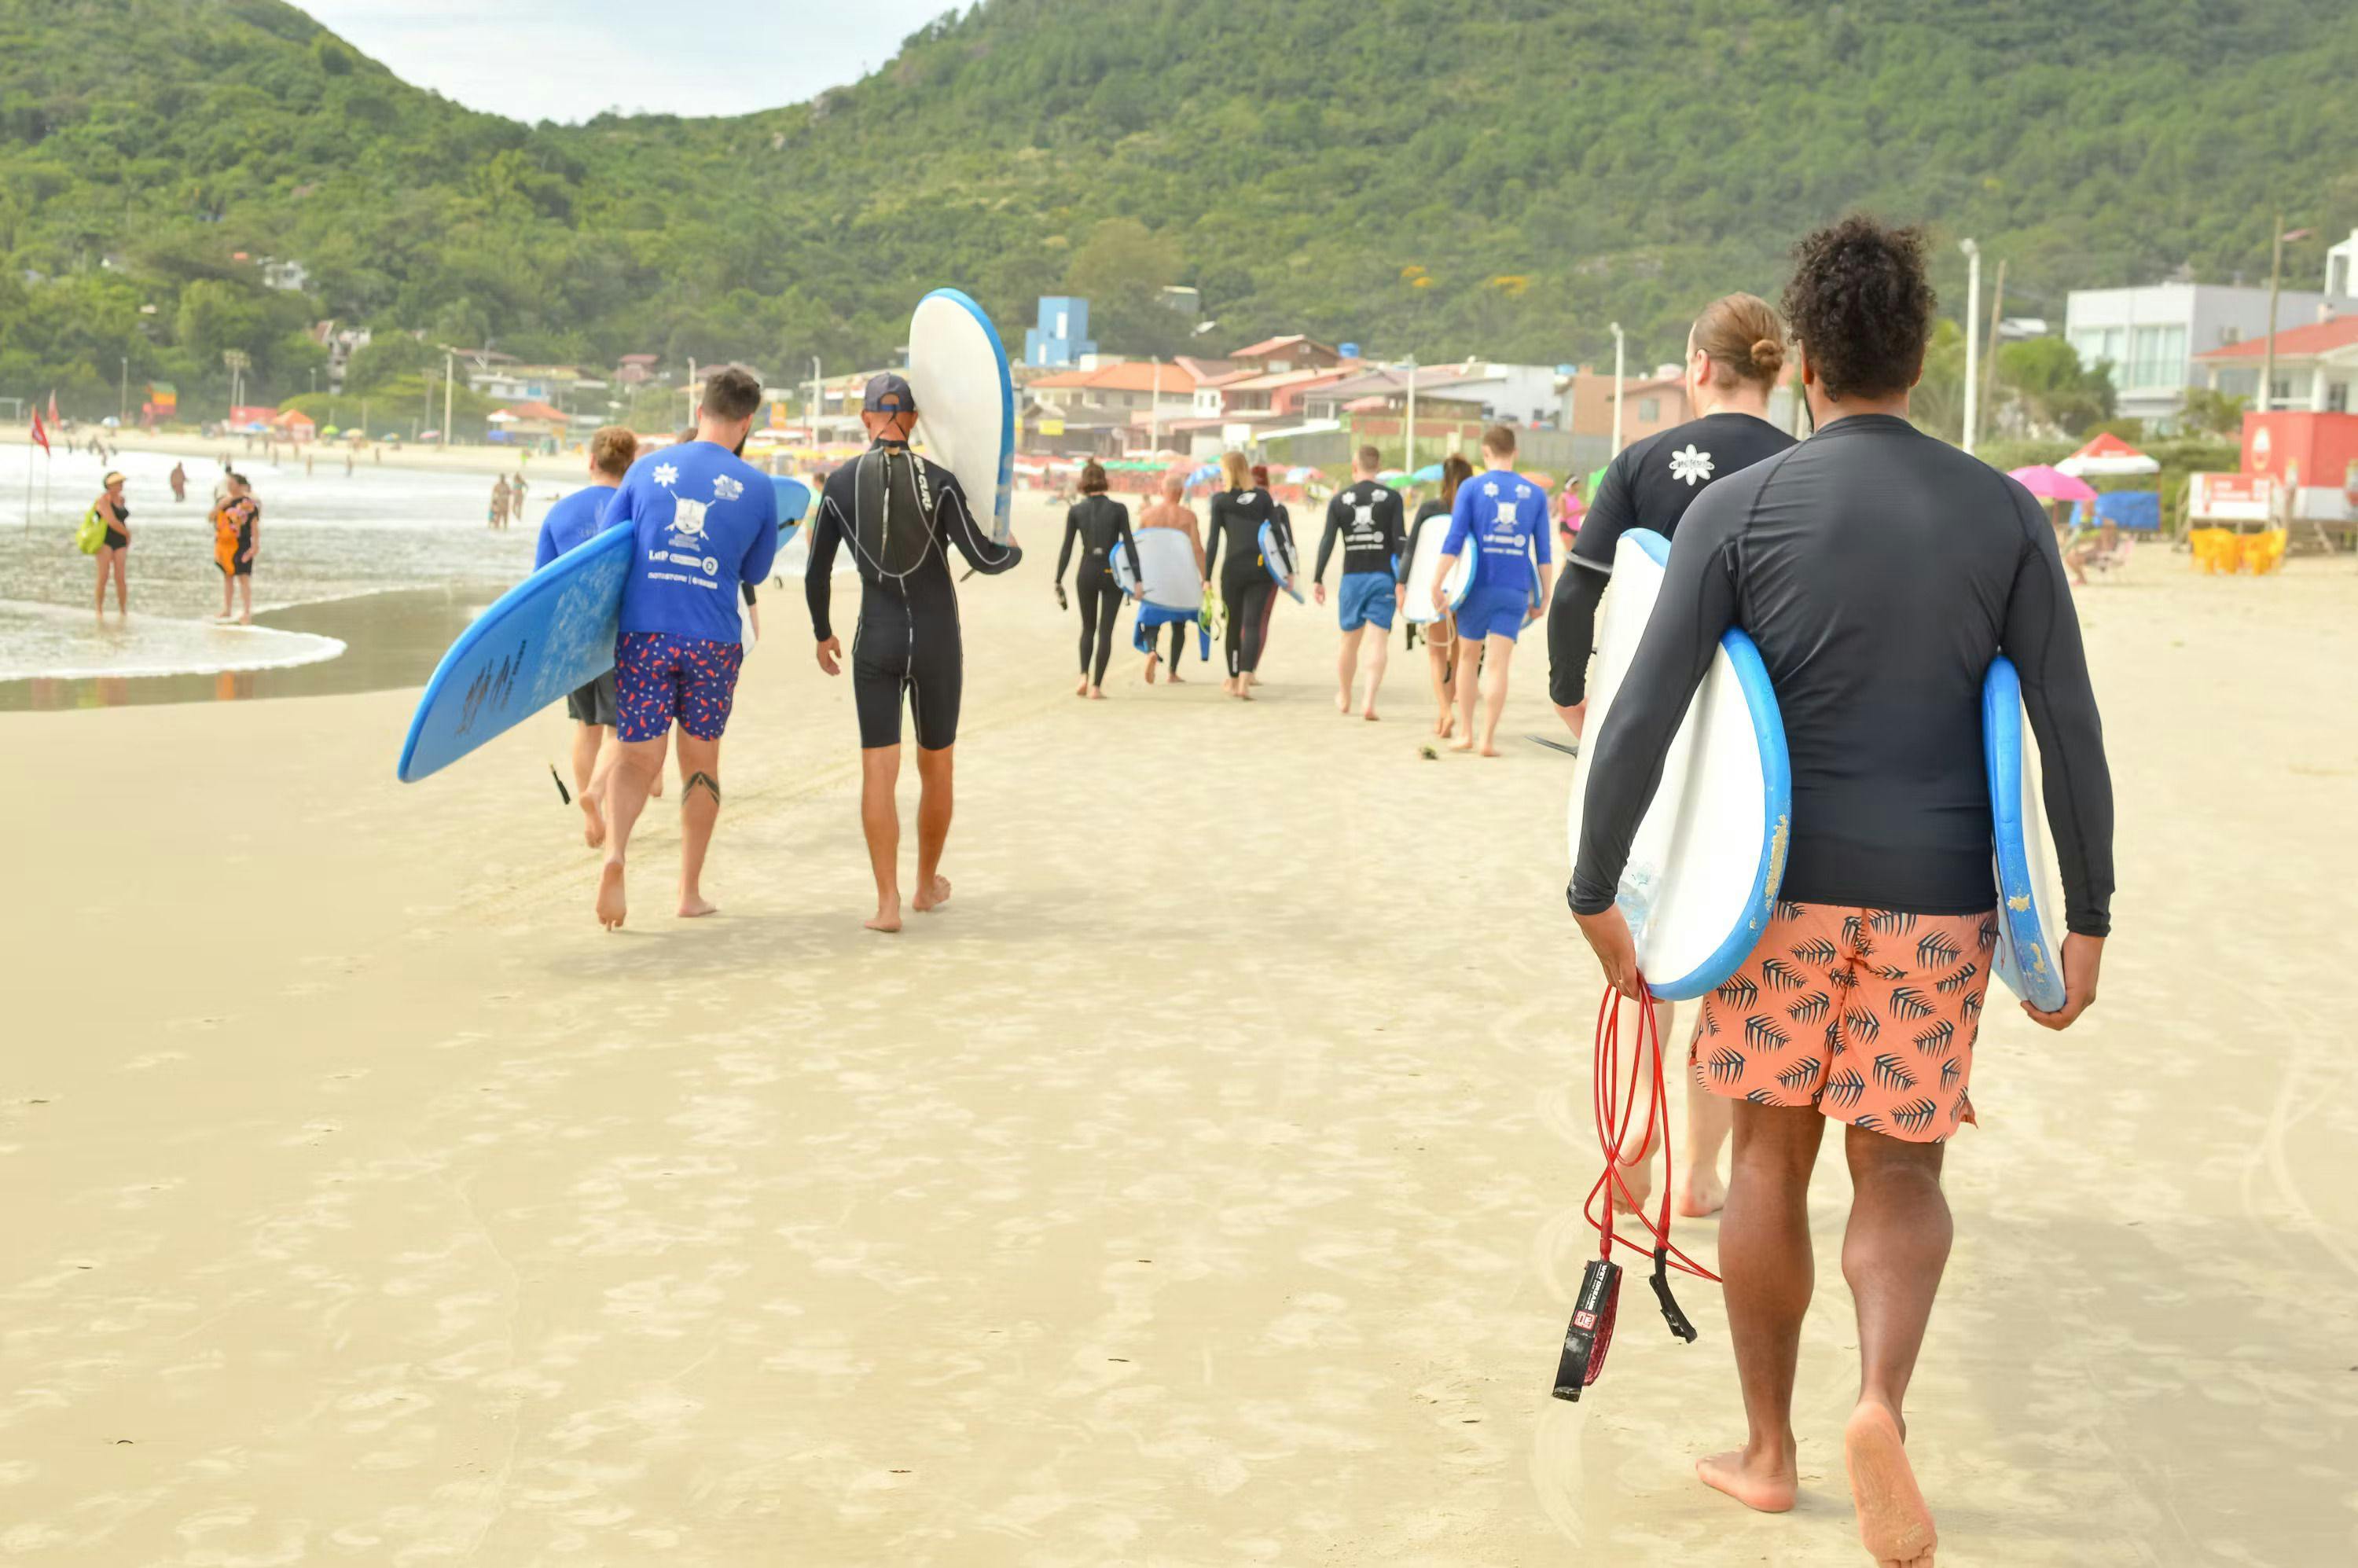 Team walking on the beach holding surf boards